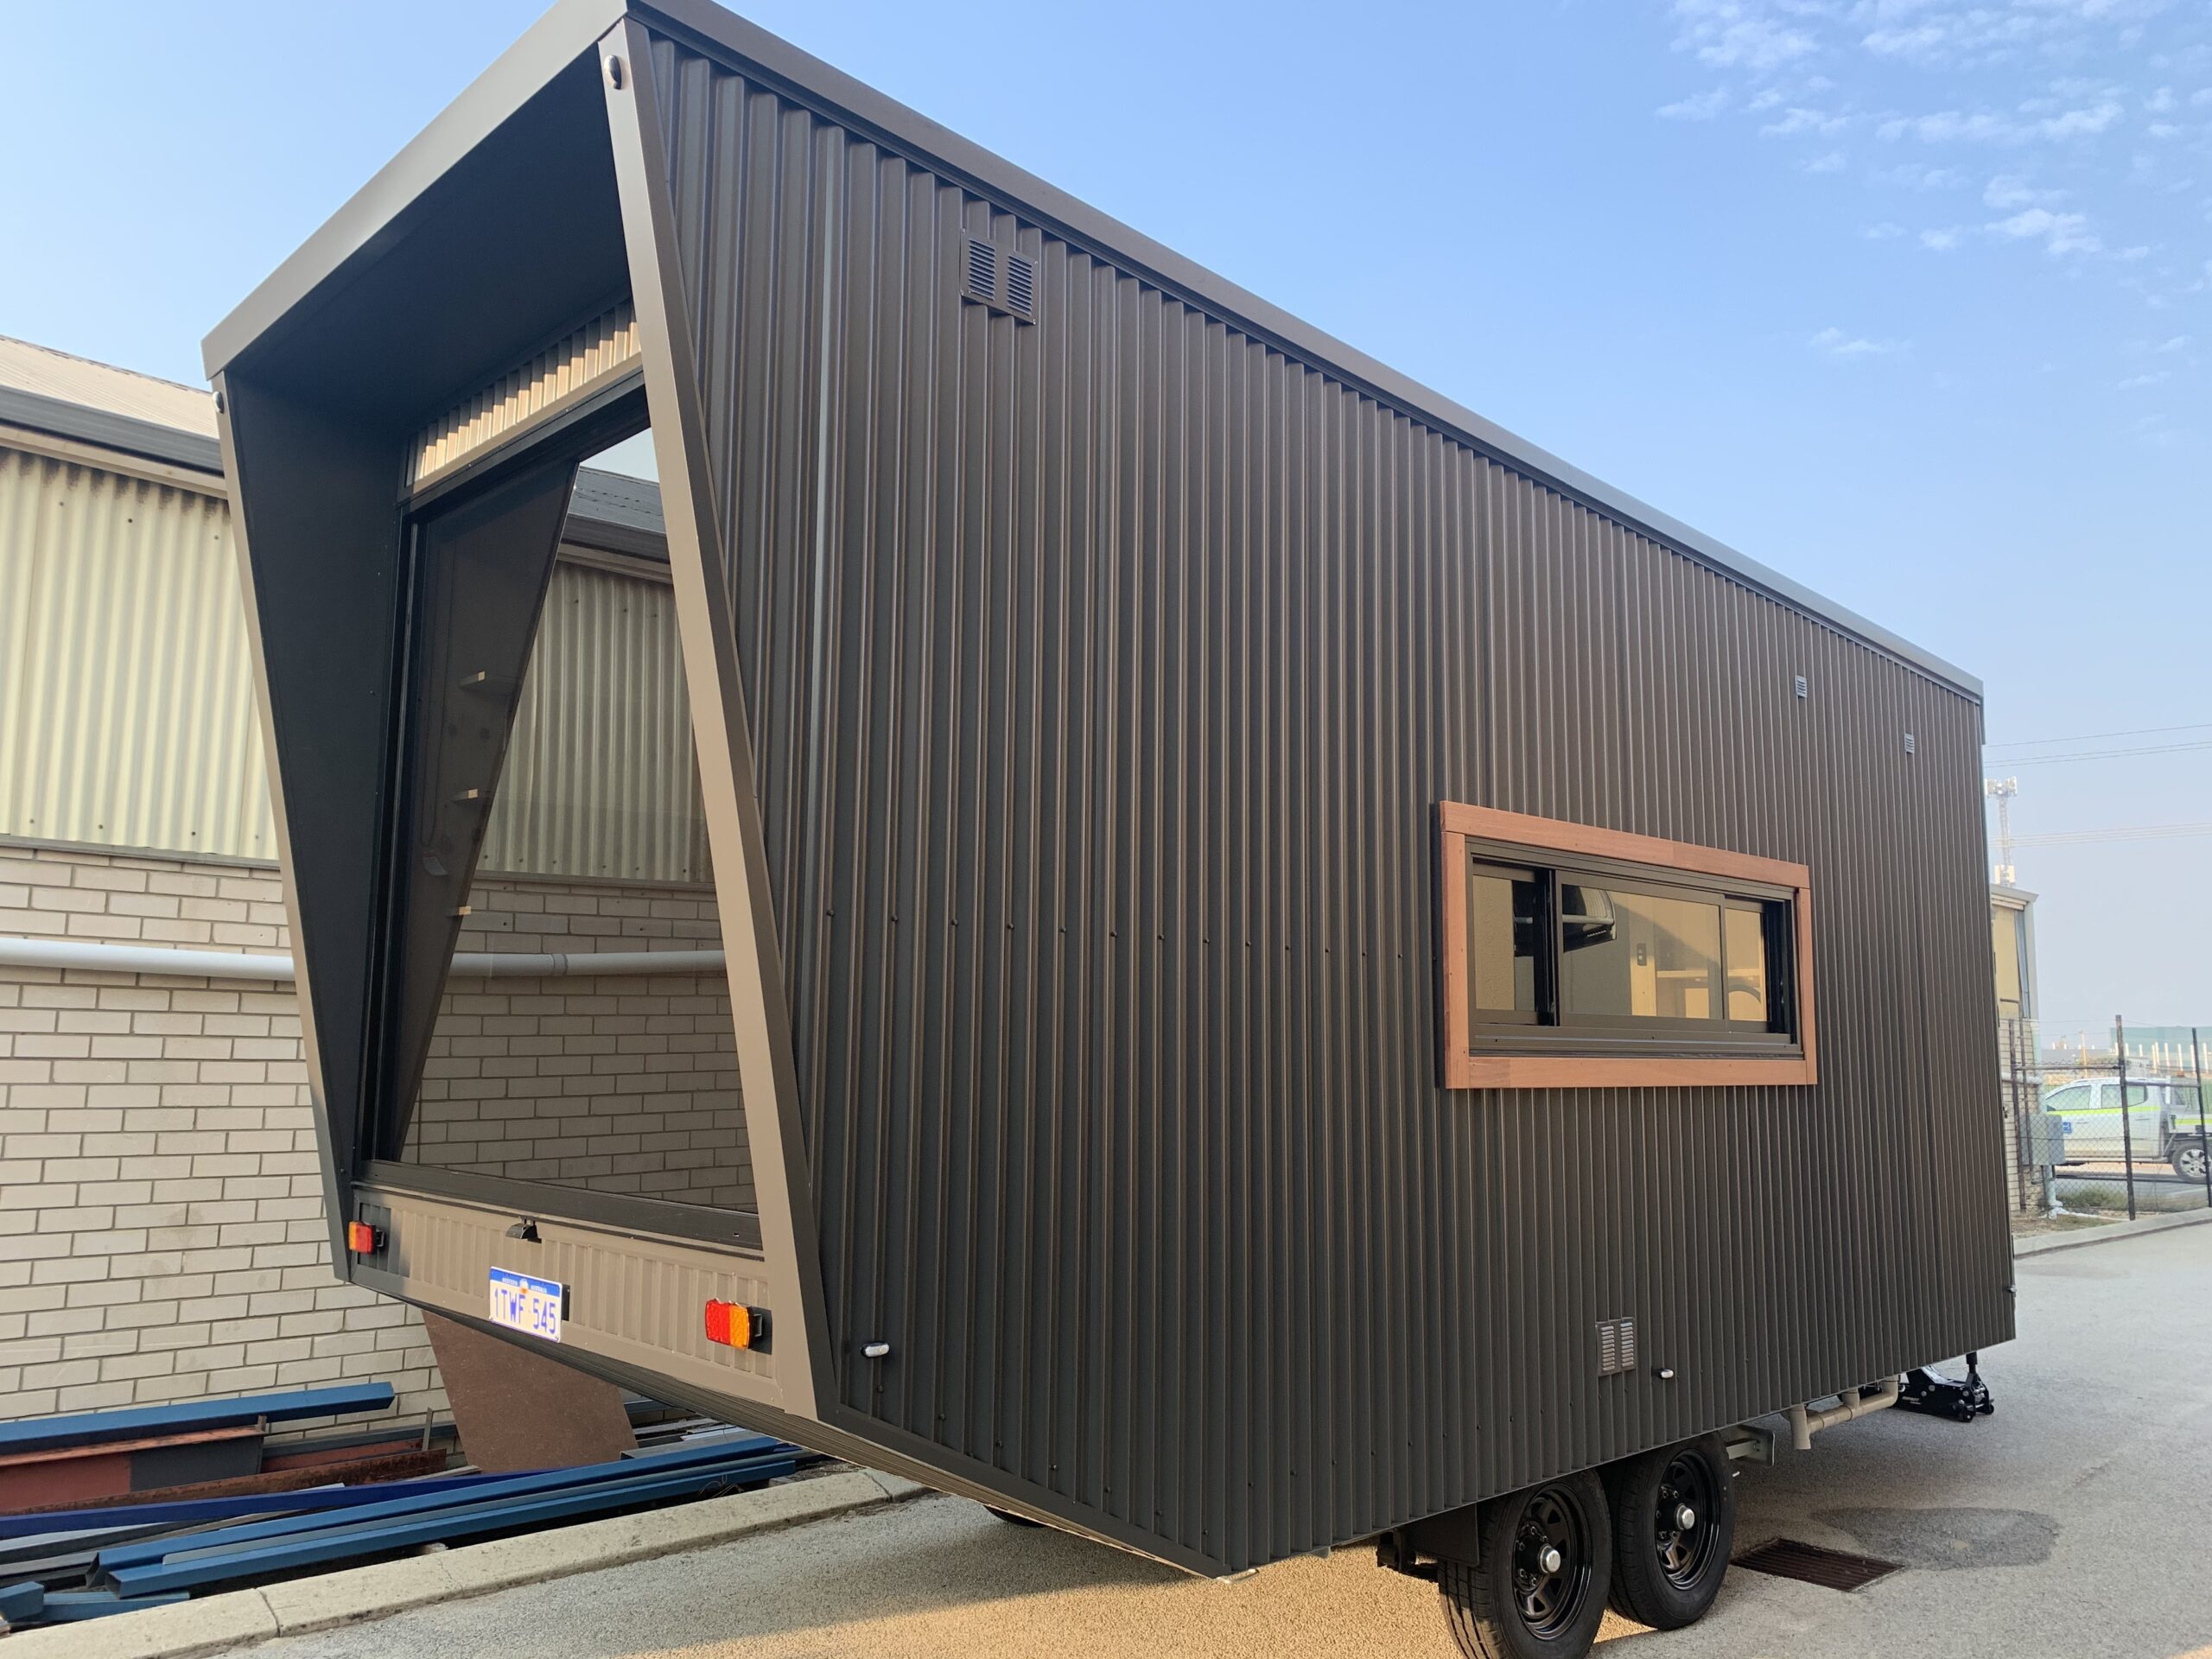 Tiny Homes Perth Client home 1018/1019